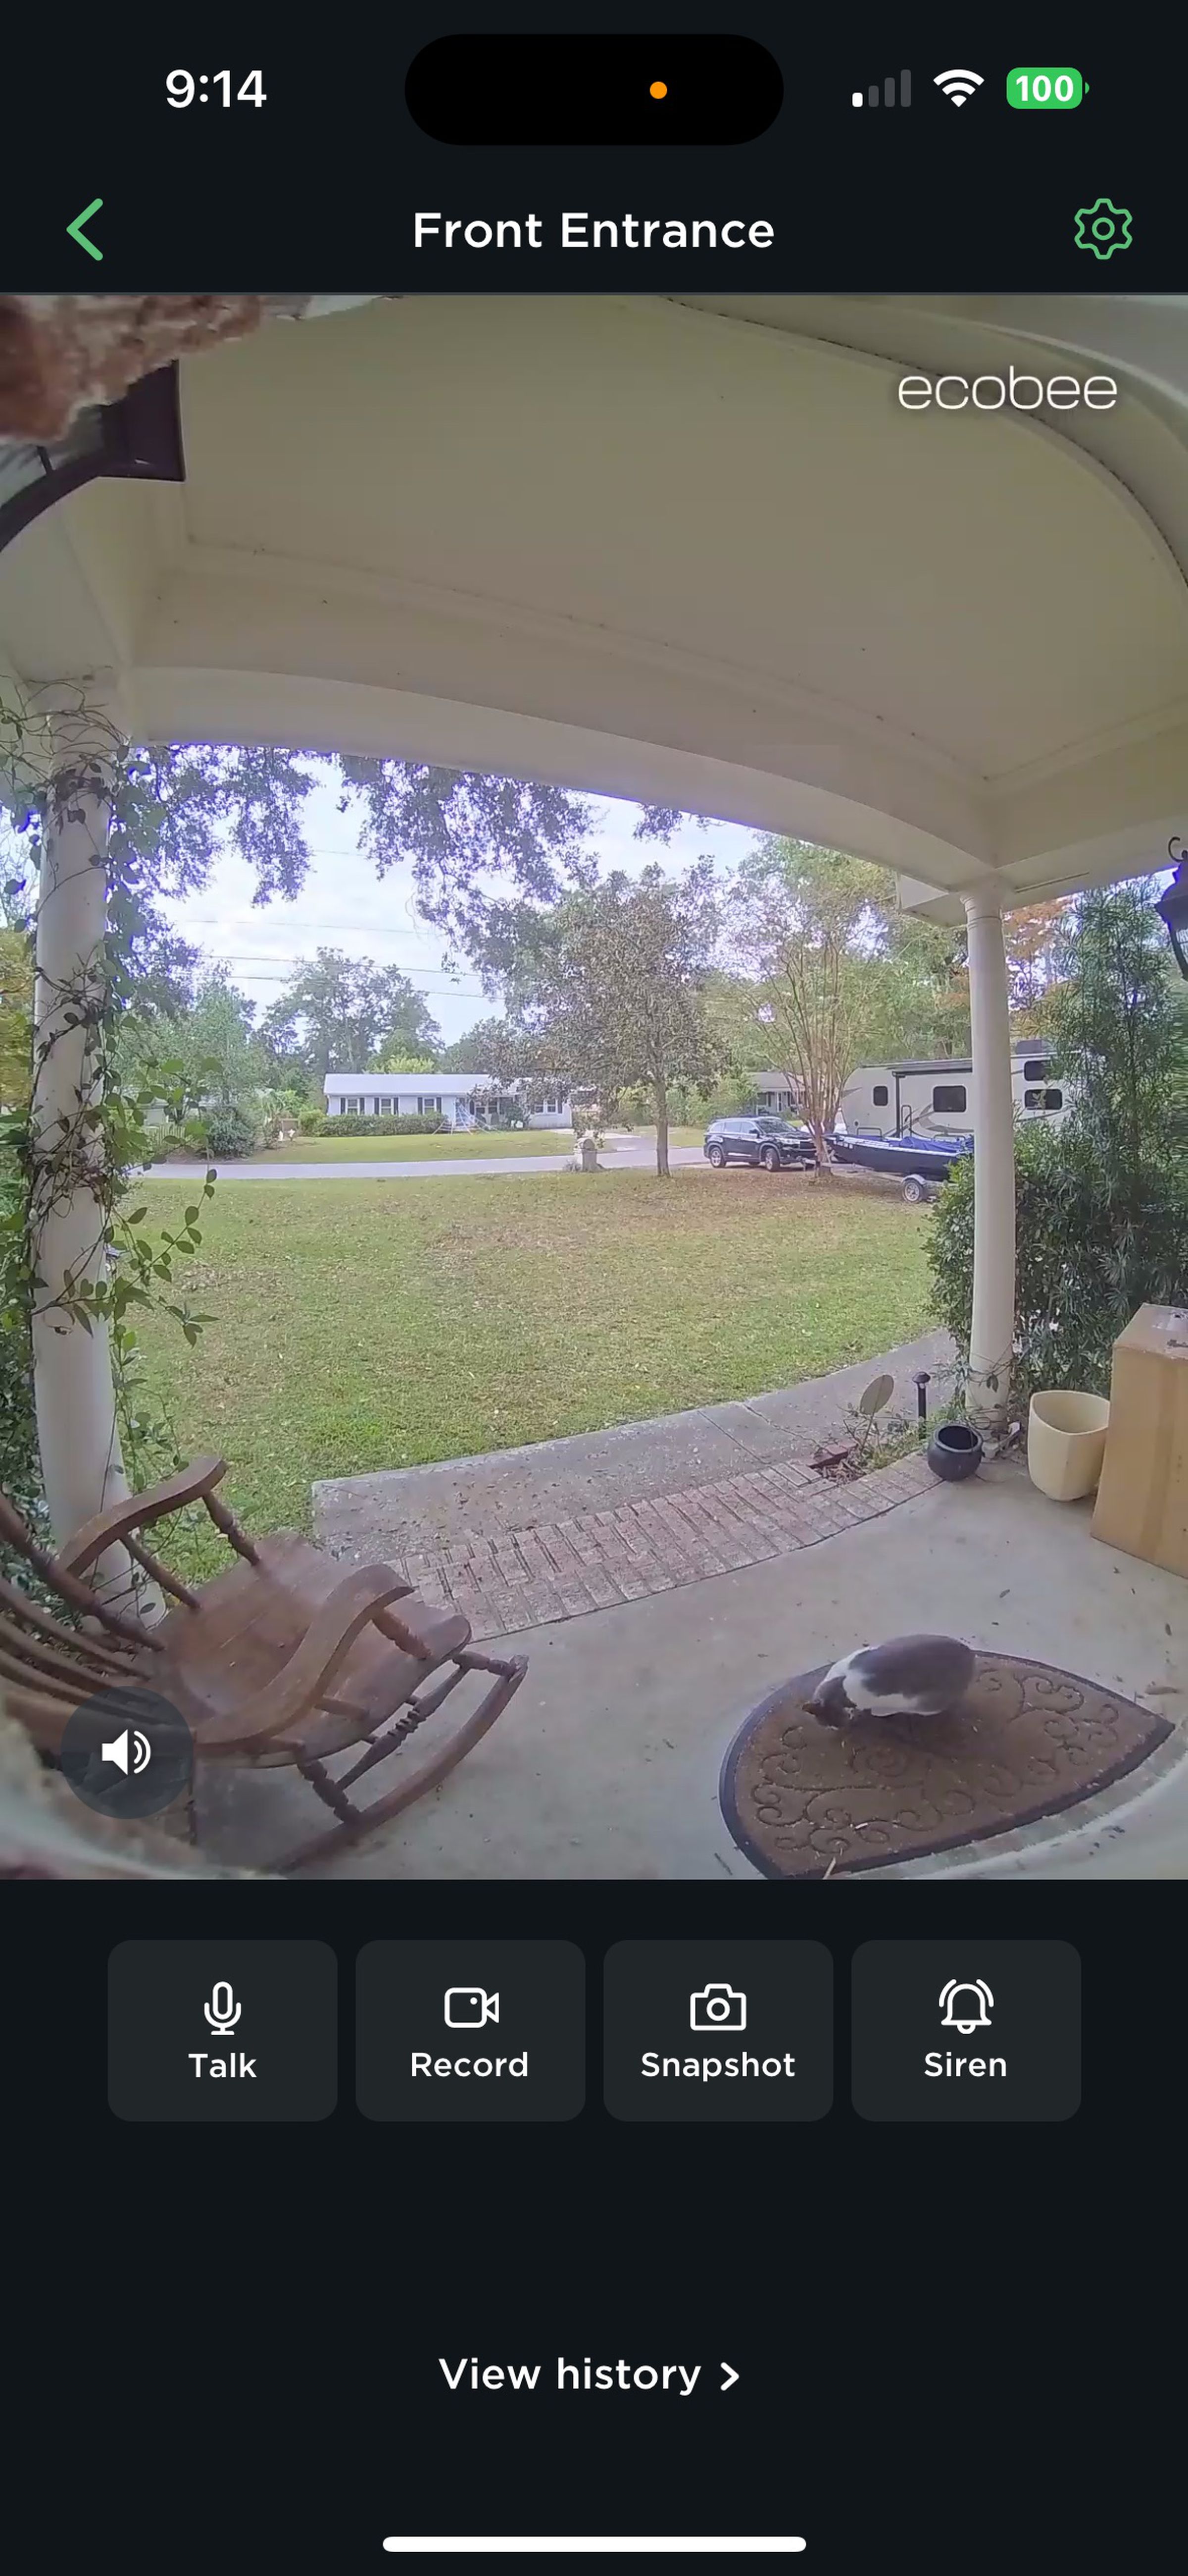 <em>My cat Smokey didn’t trigger the motion detection so was left out in the cold a bit longer than he would have liked.</em>